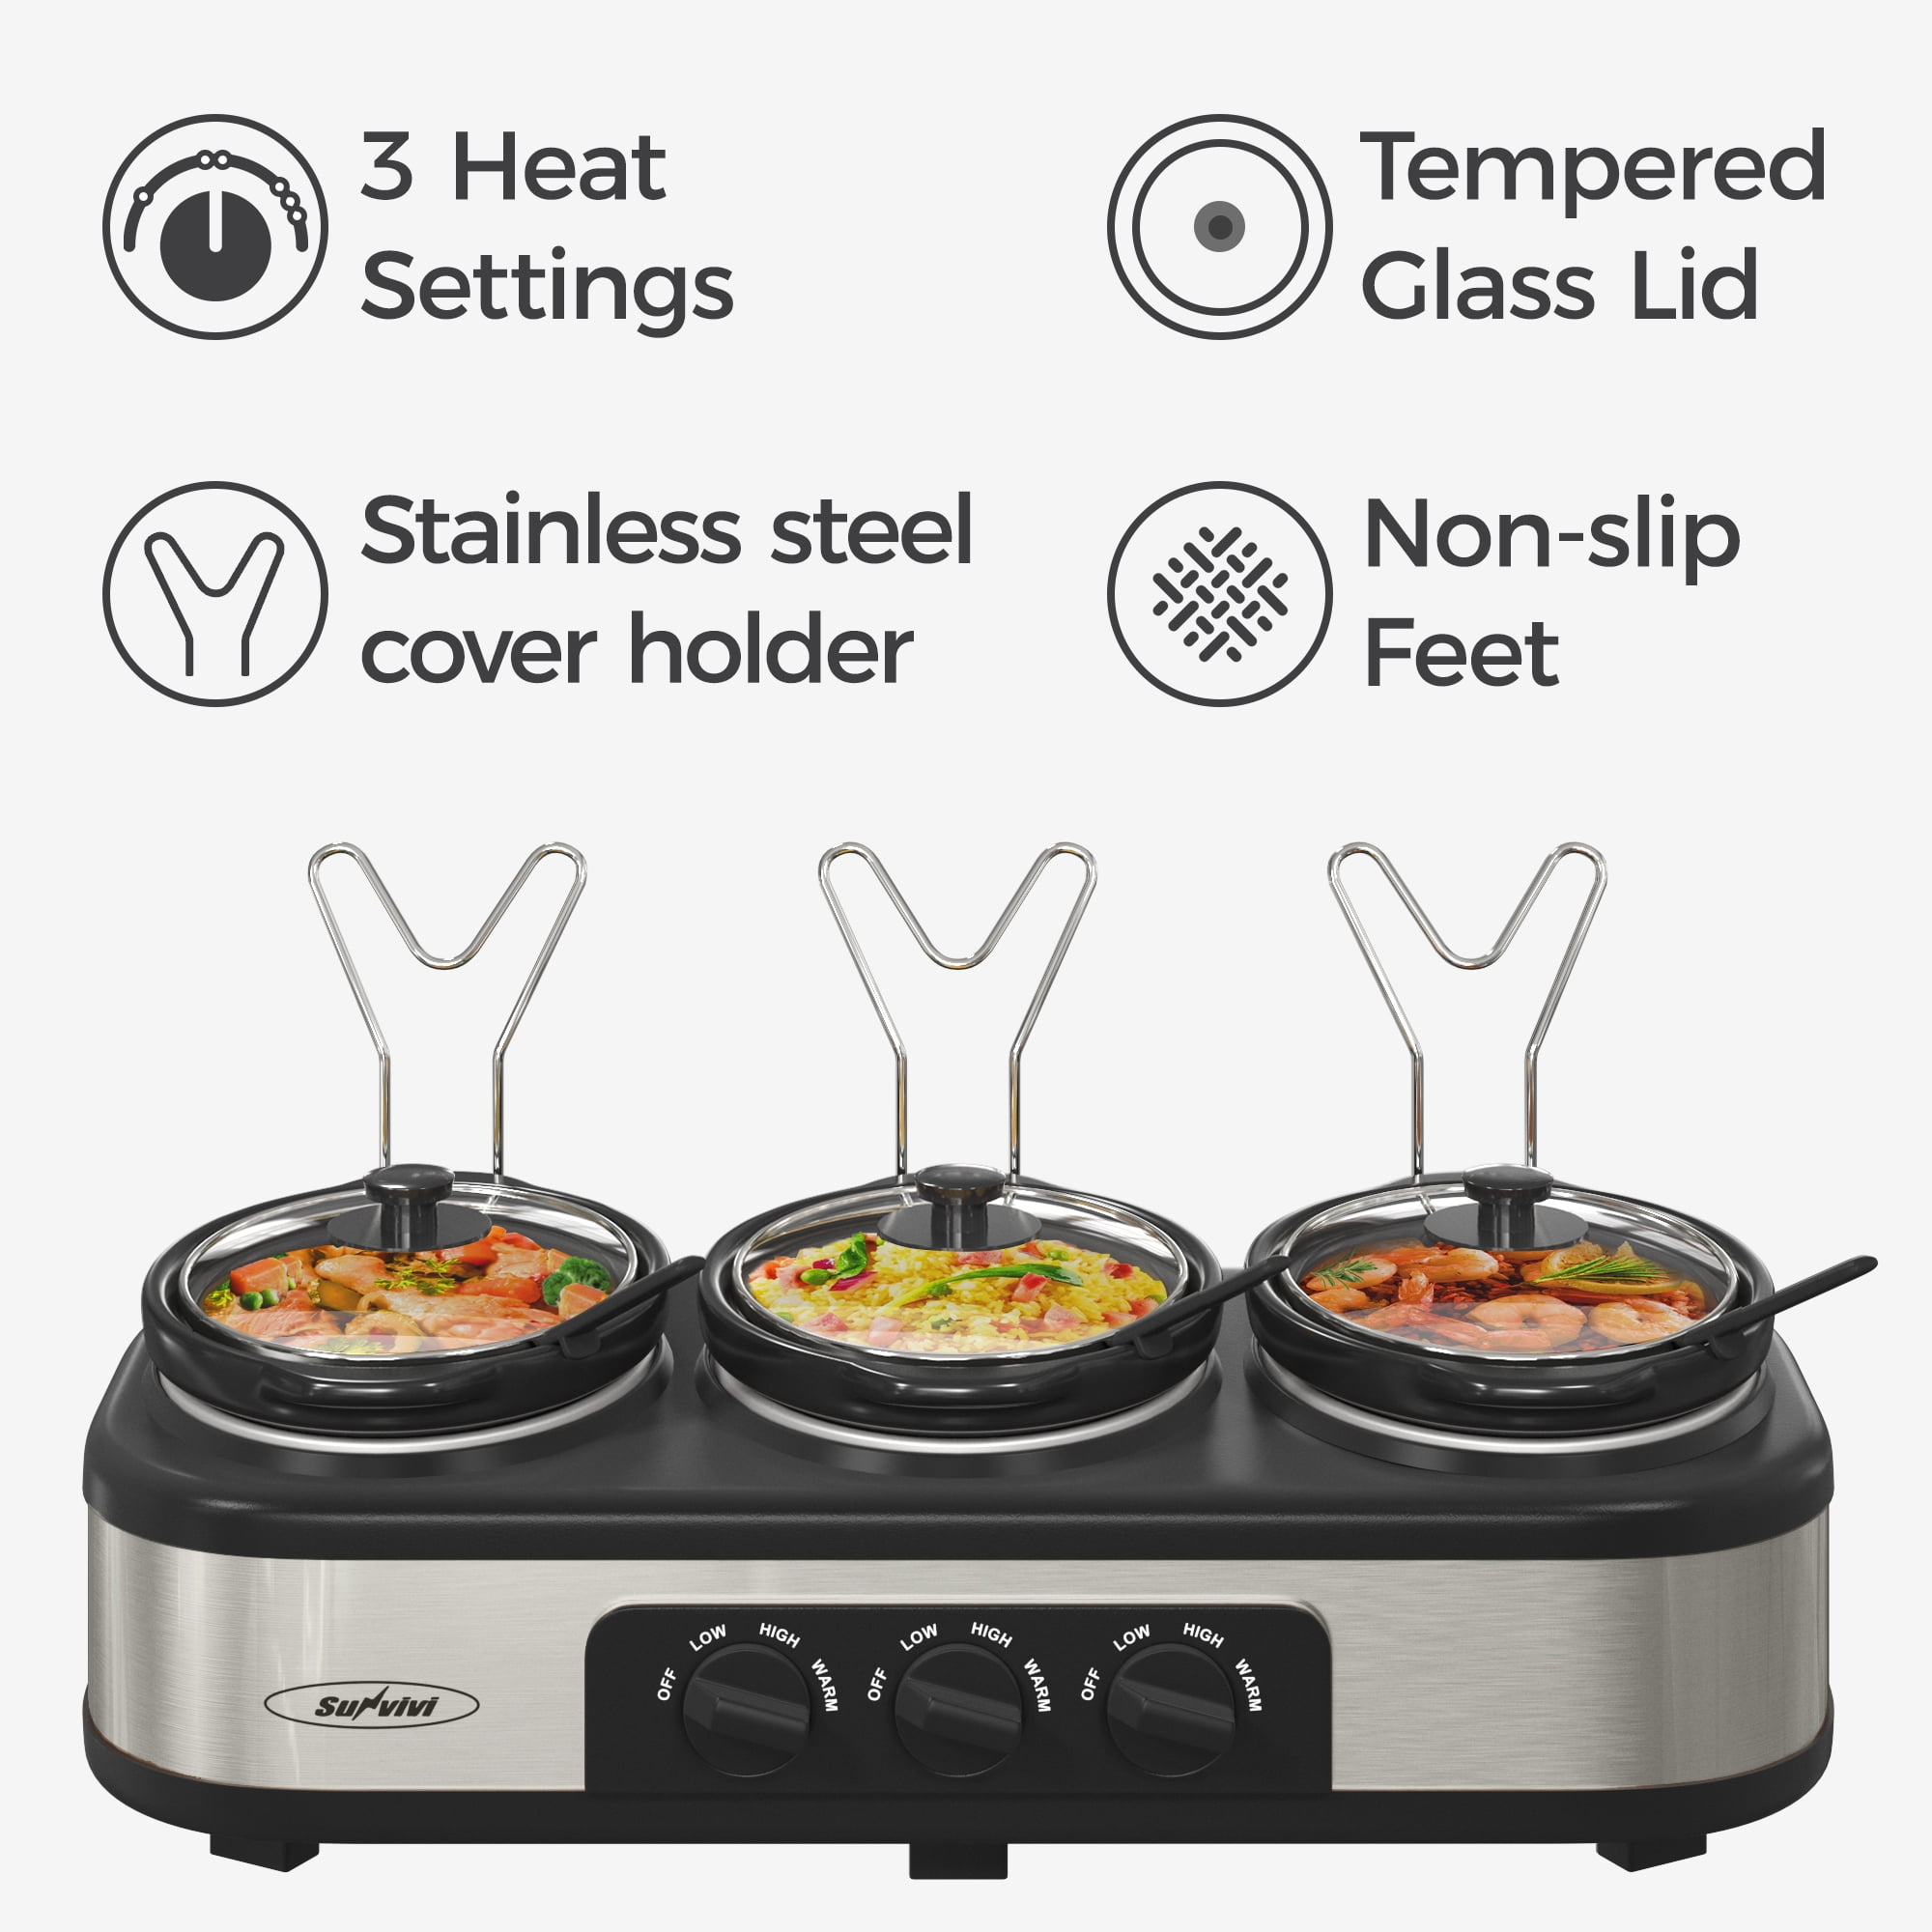 Triple Slow Cooker, 3×1.5 QT Buffet Servers and Warmers, 3 Pots Buffet Slow  Cooker Adjustable Temp Lid Rests Stainless Steel Manual Silver for Parties